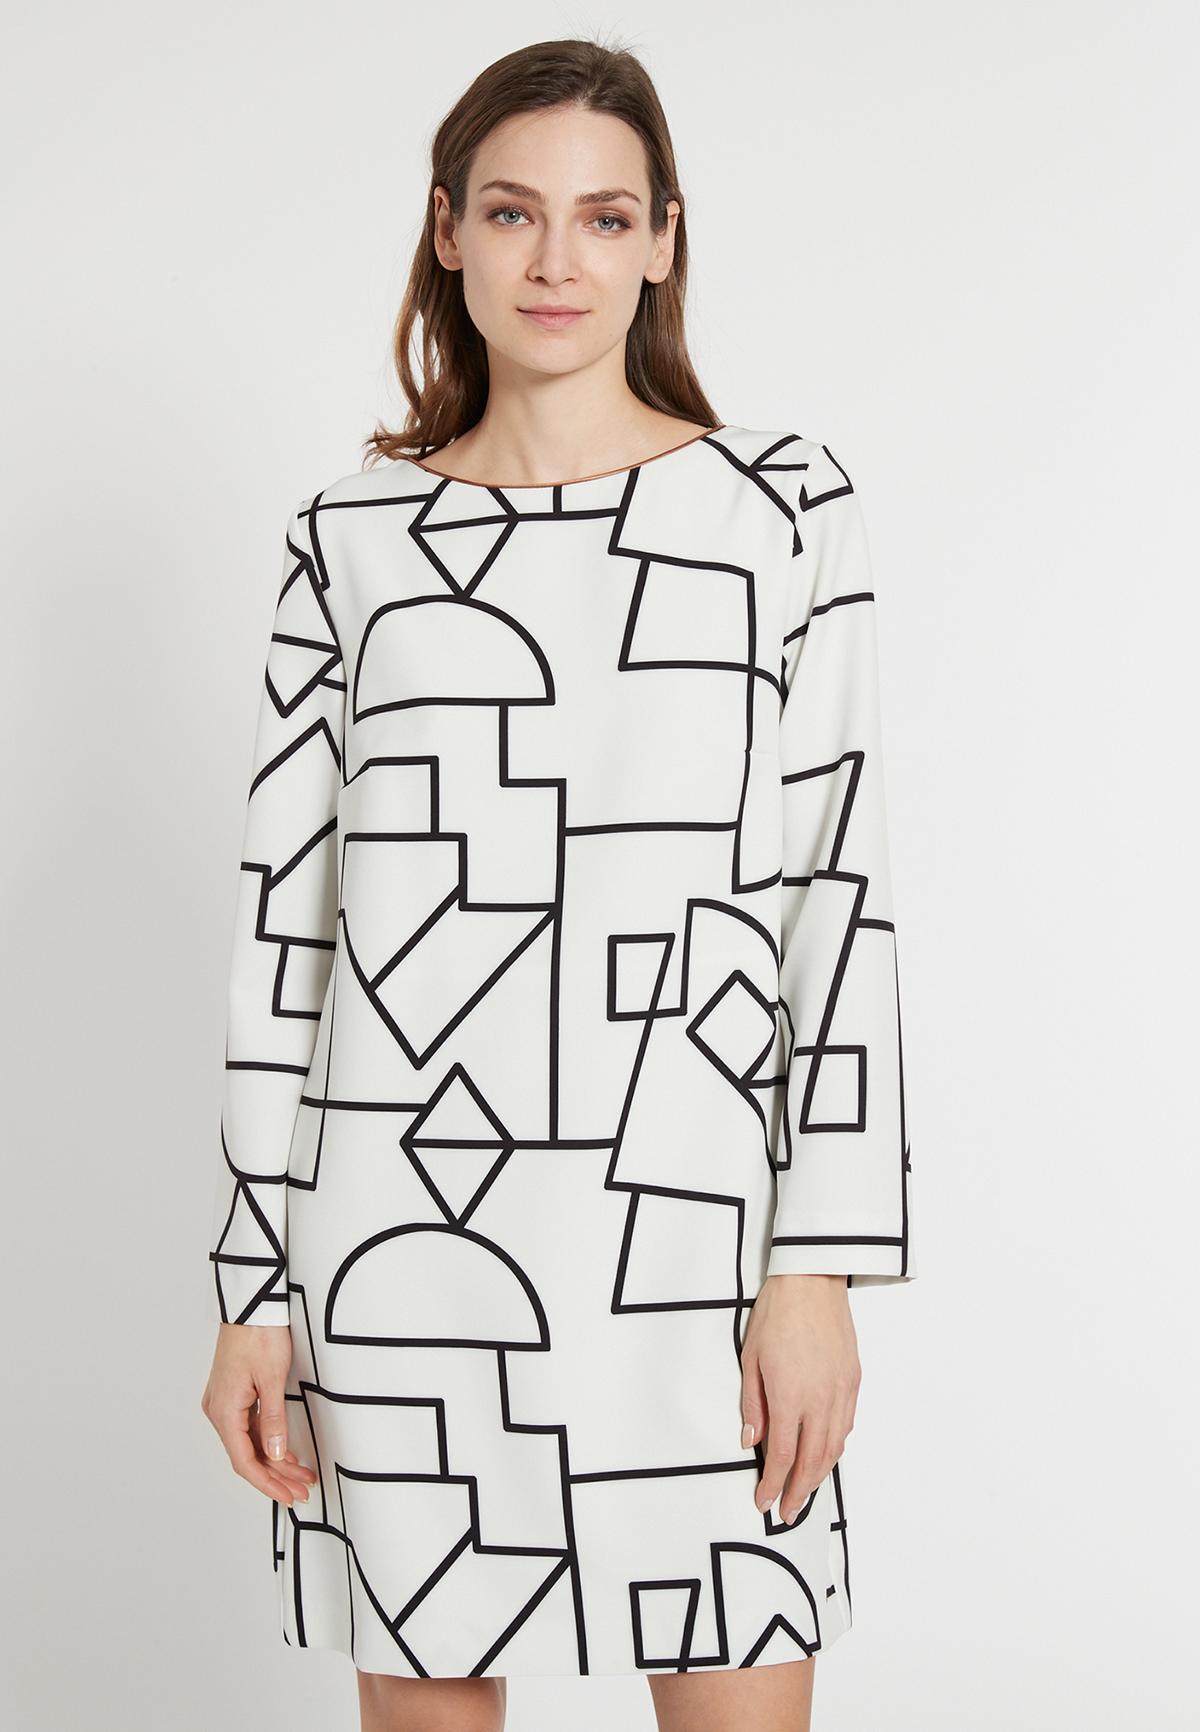 A-shaped dress Edvis in black&white with graphic pattern | Ana Alcazar